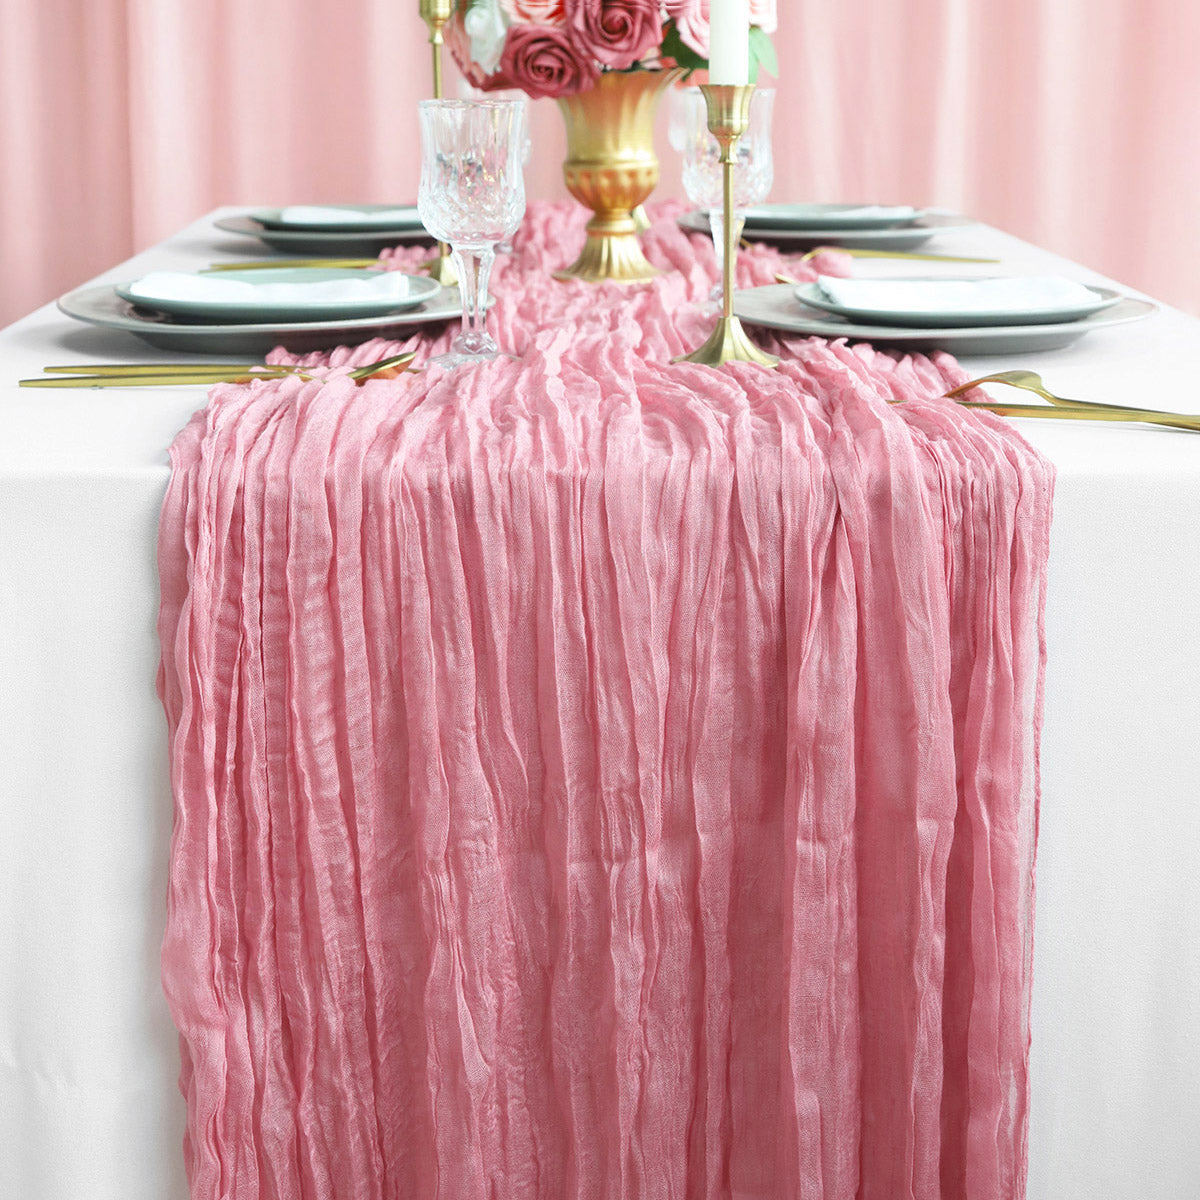 2 Pcs Cheesecloth Table Runner - Dusty Rose